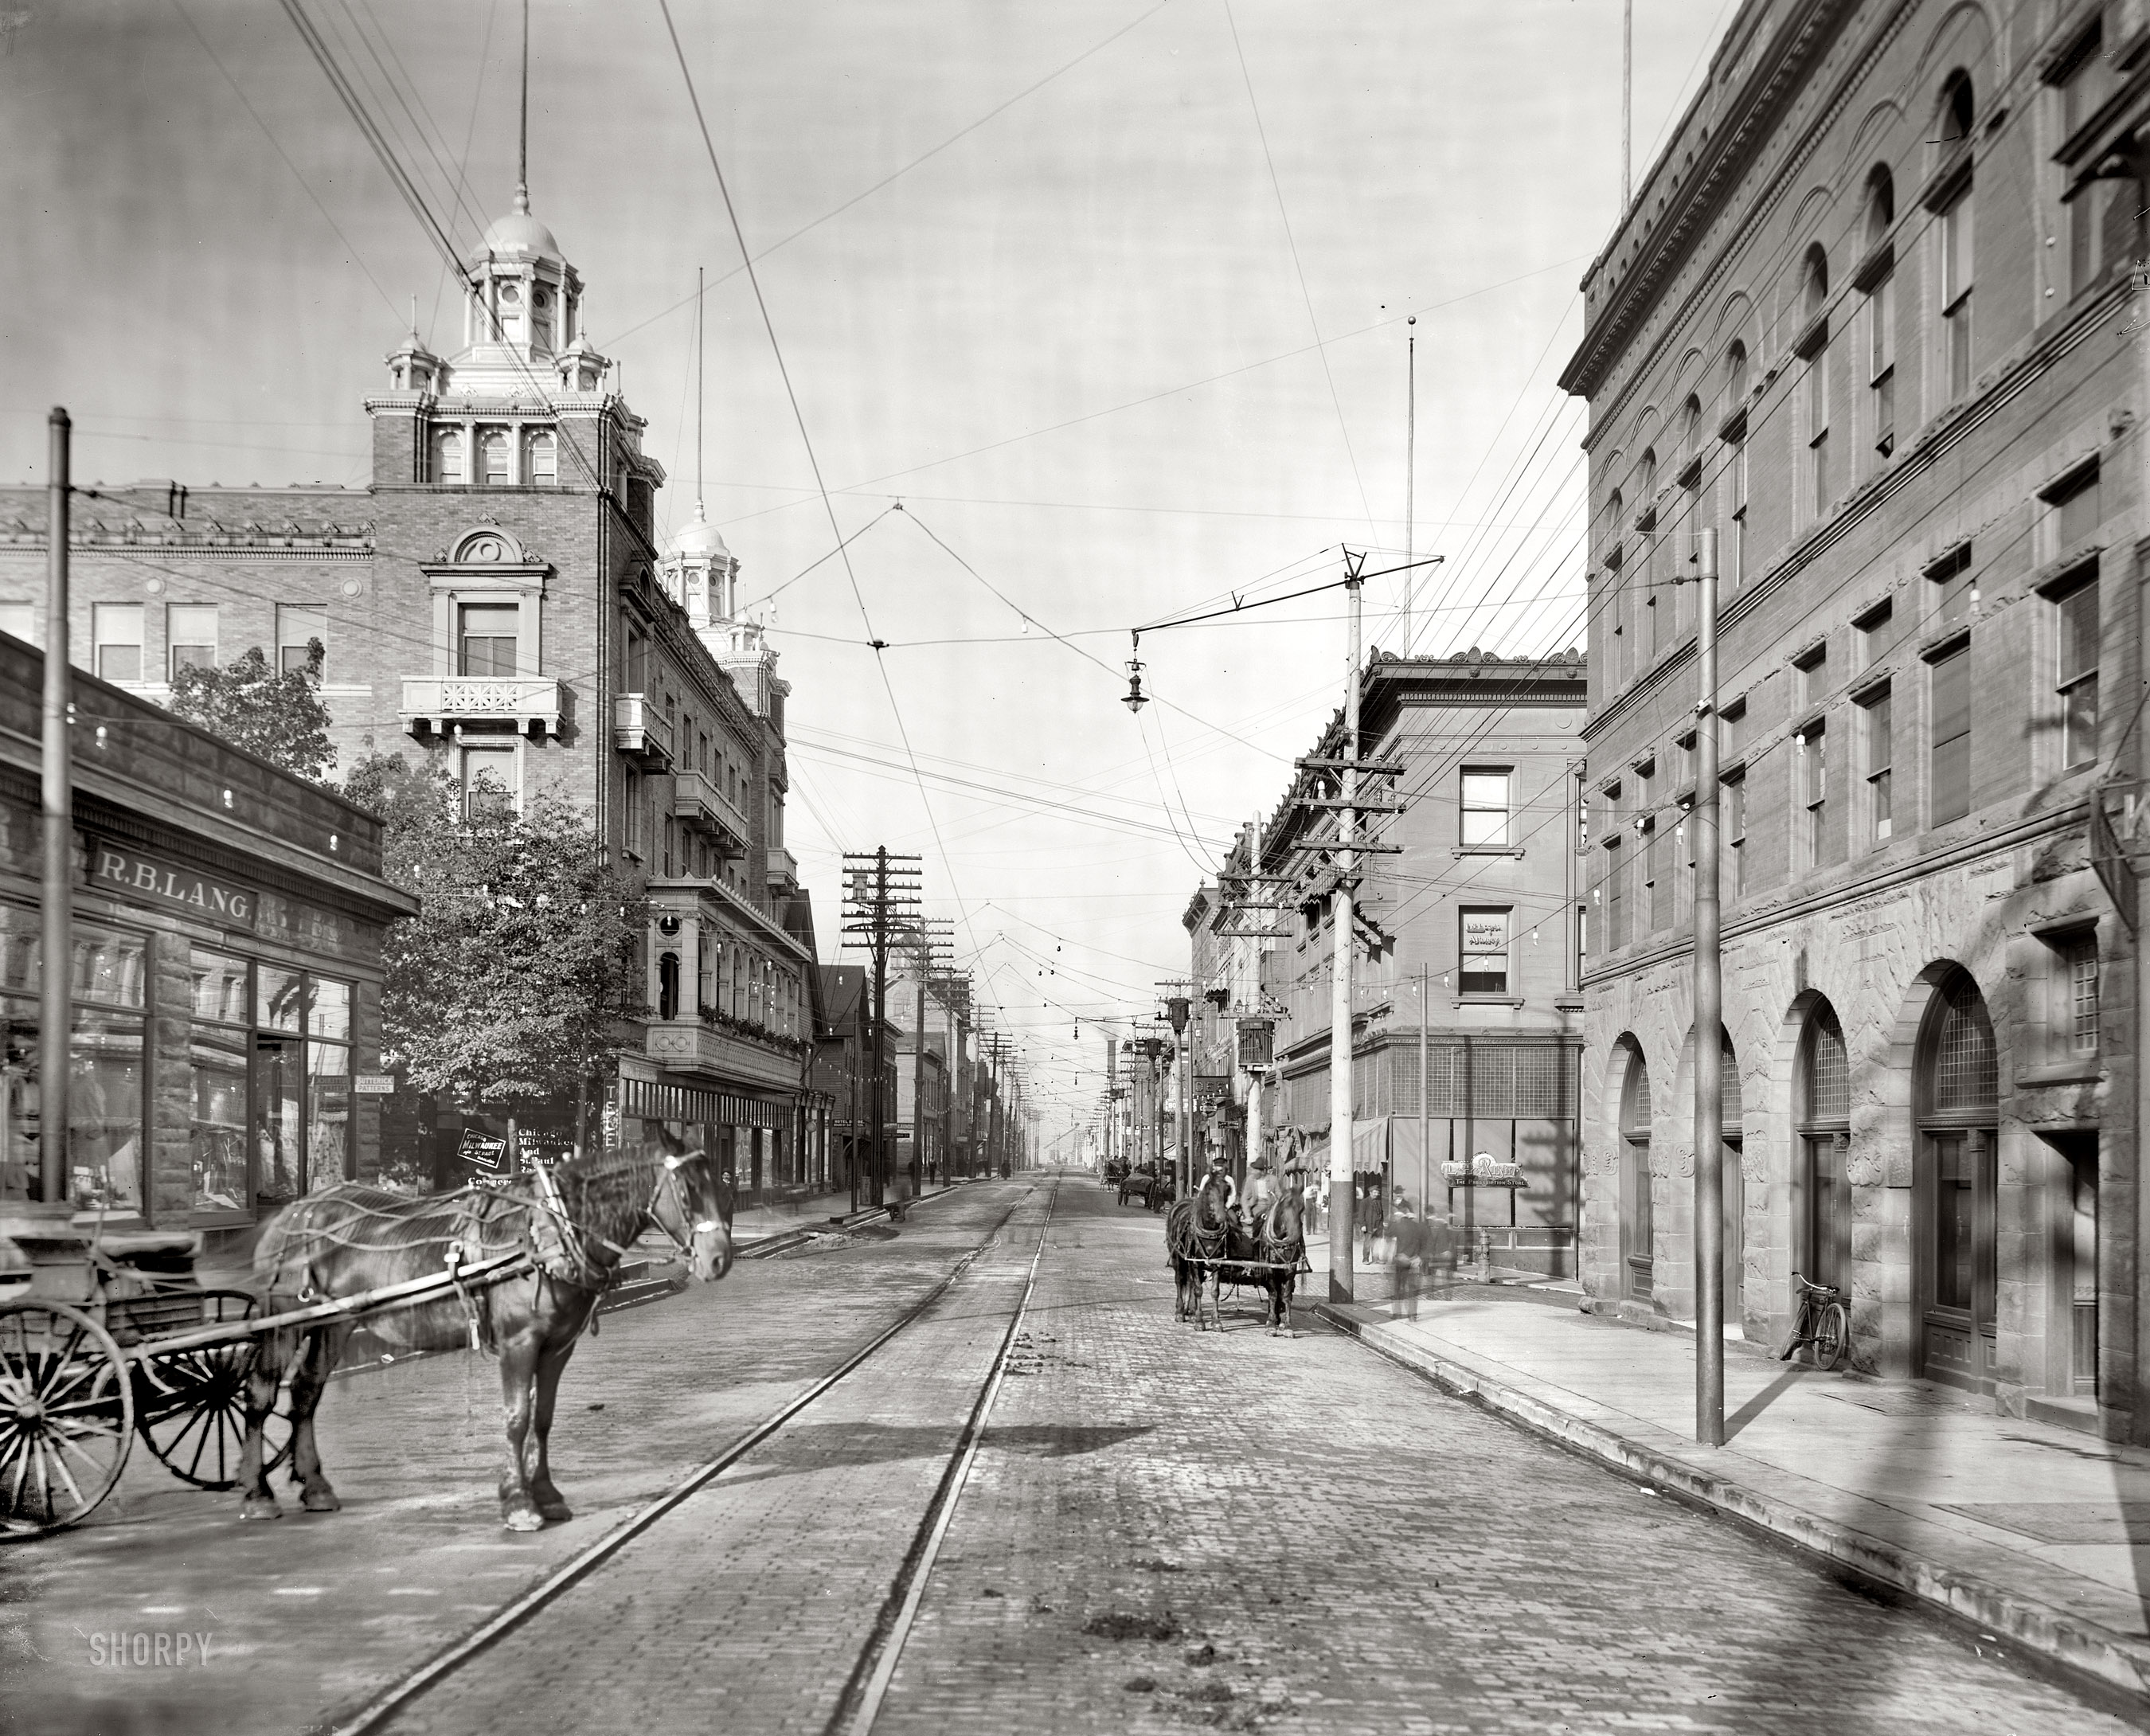 Houghton, Michigan, circa 1906. "Shelden Street." Houghton was nothing if not well wired. 8x10 dry plate glass negative, Detroit Publishing Co. View full size.